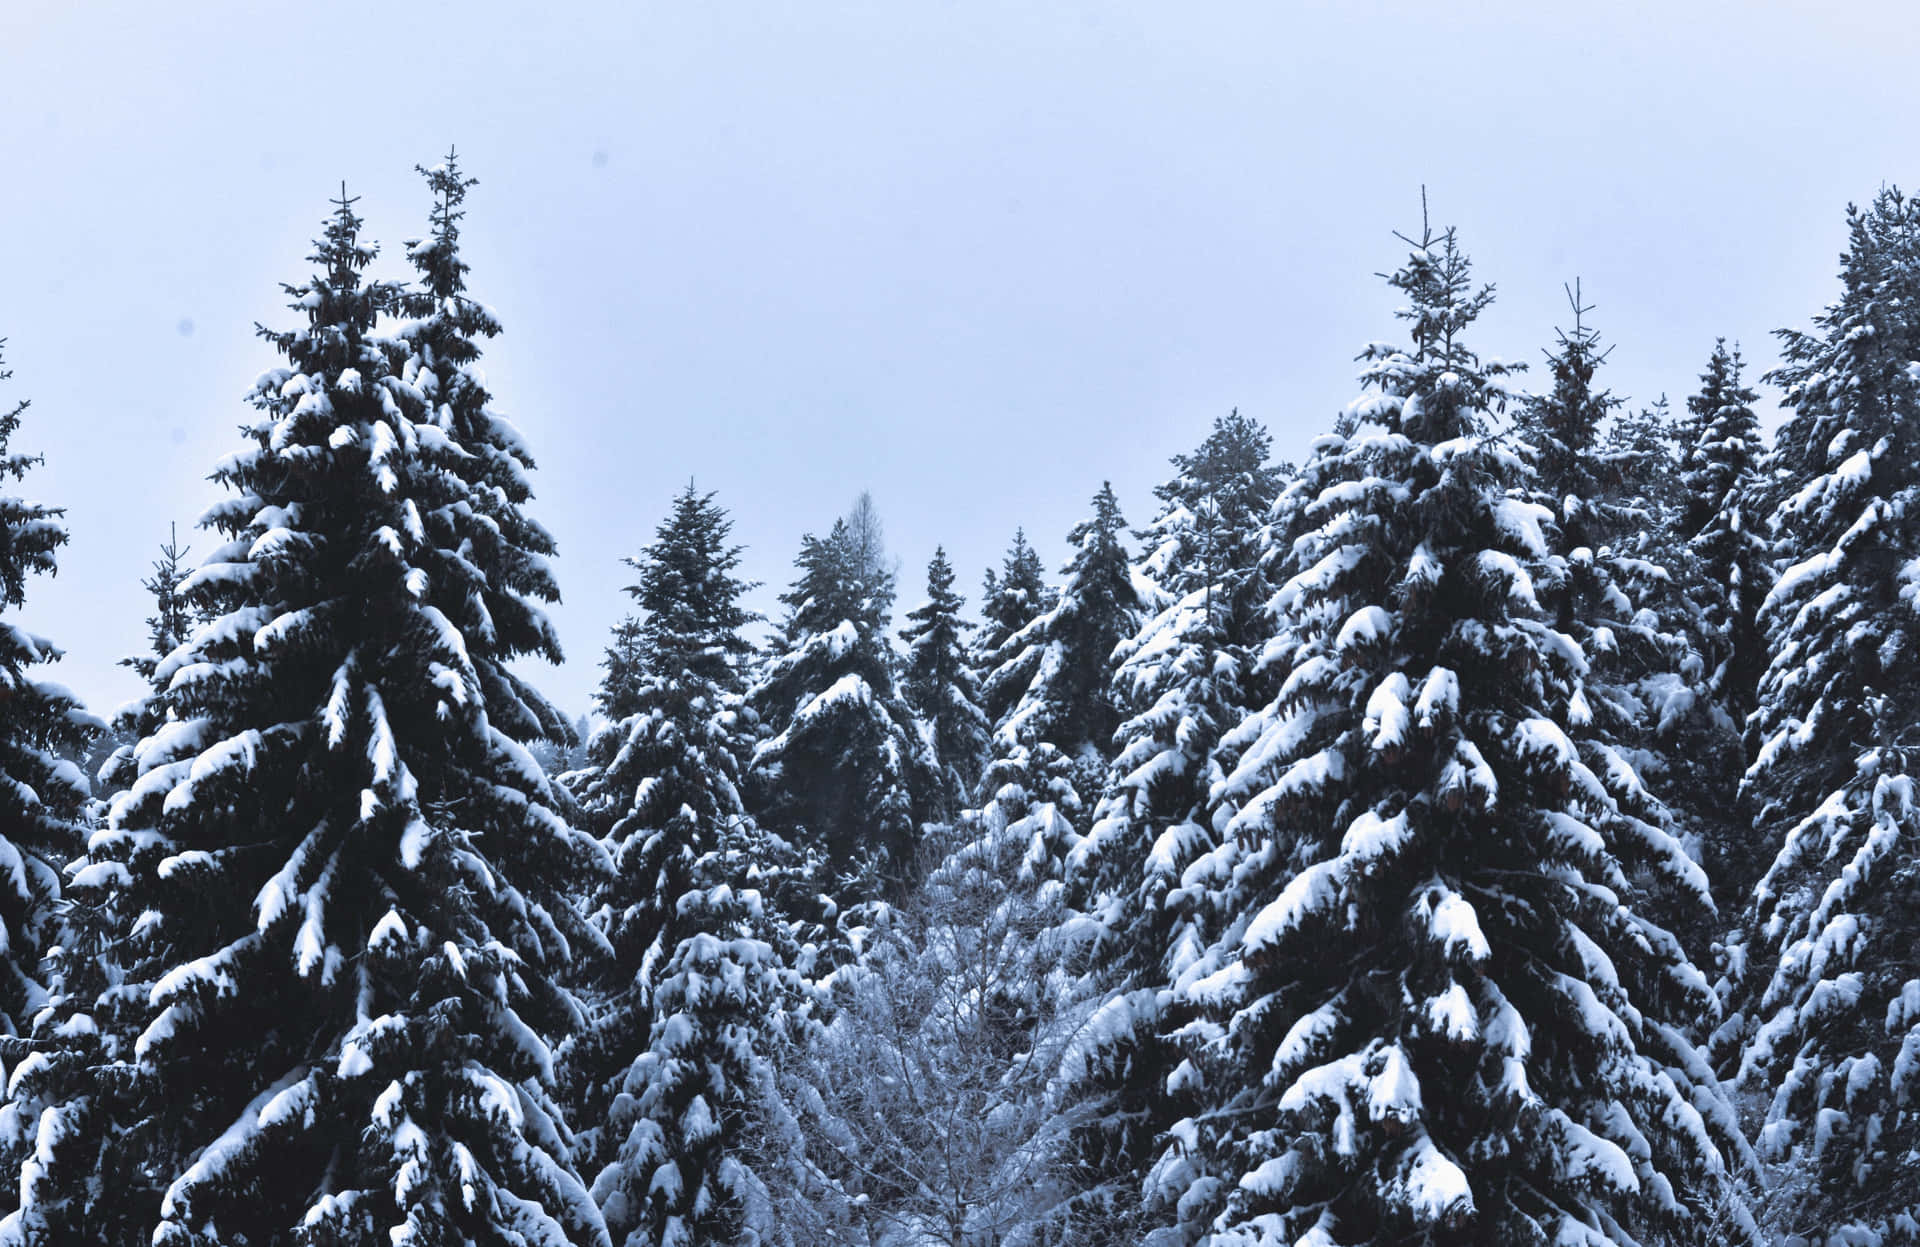 "Unearthly Beauty - A Majestic Snowy Forest"